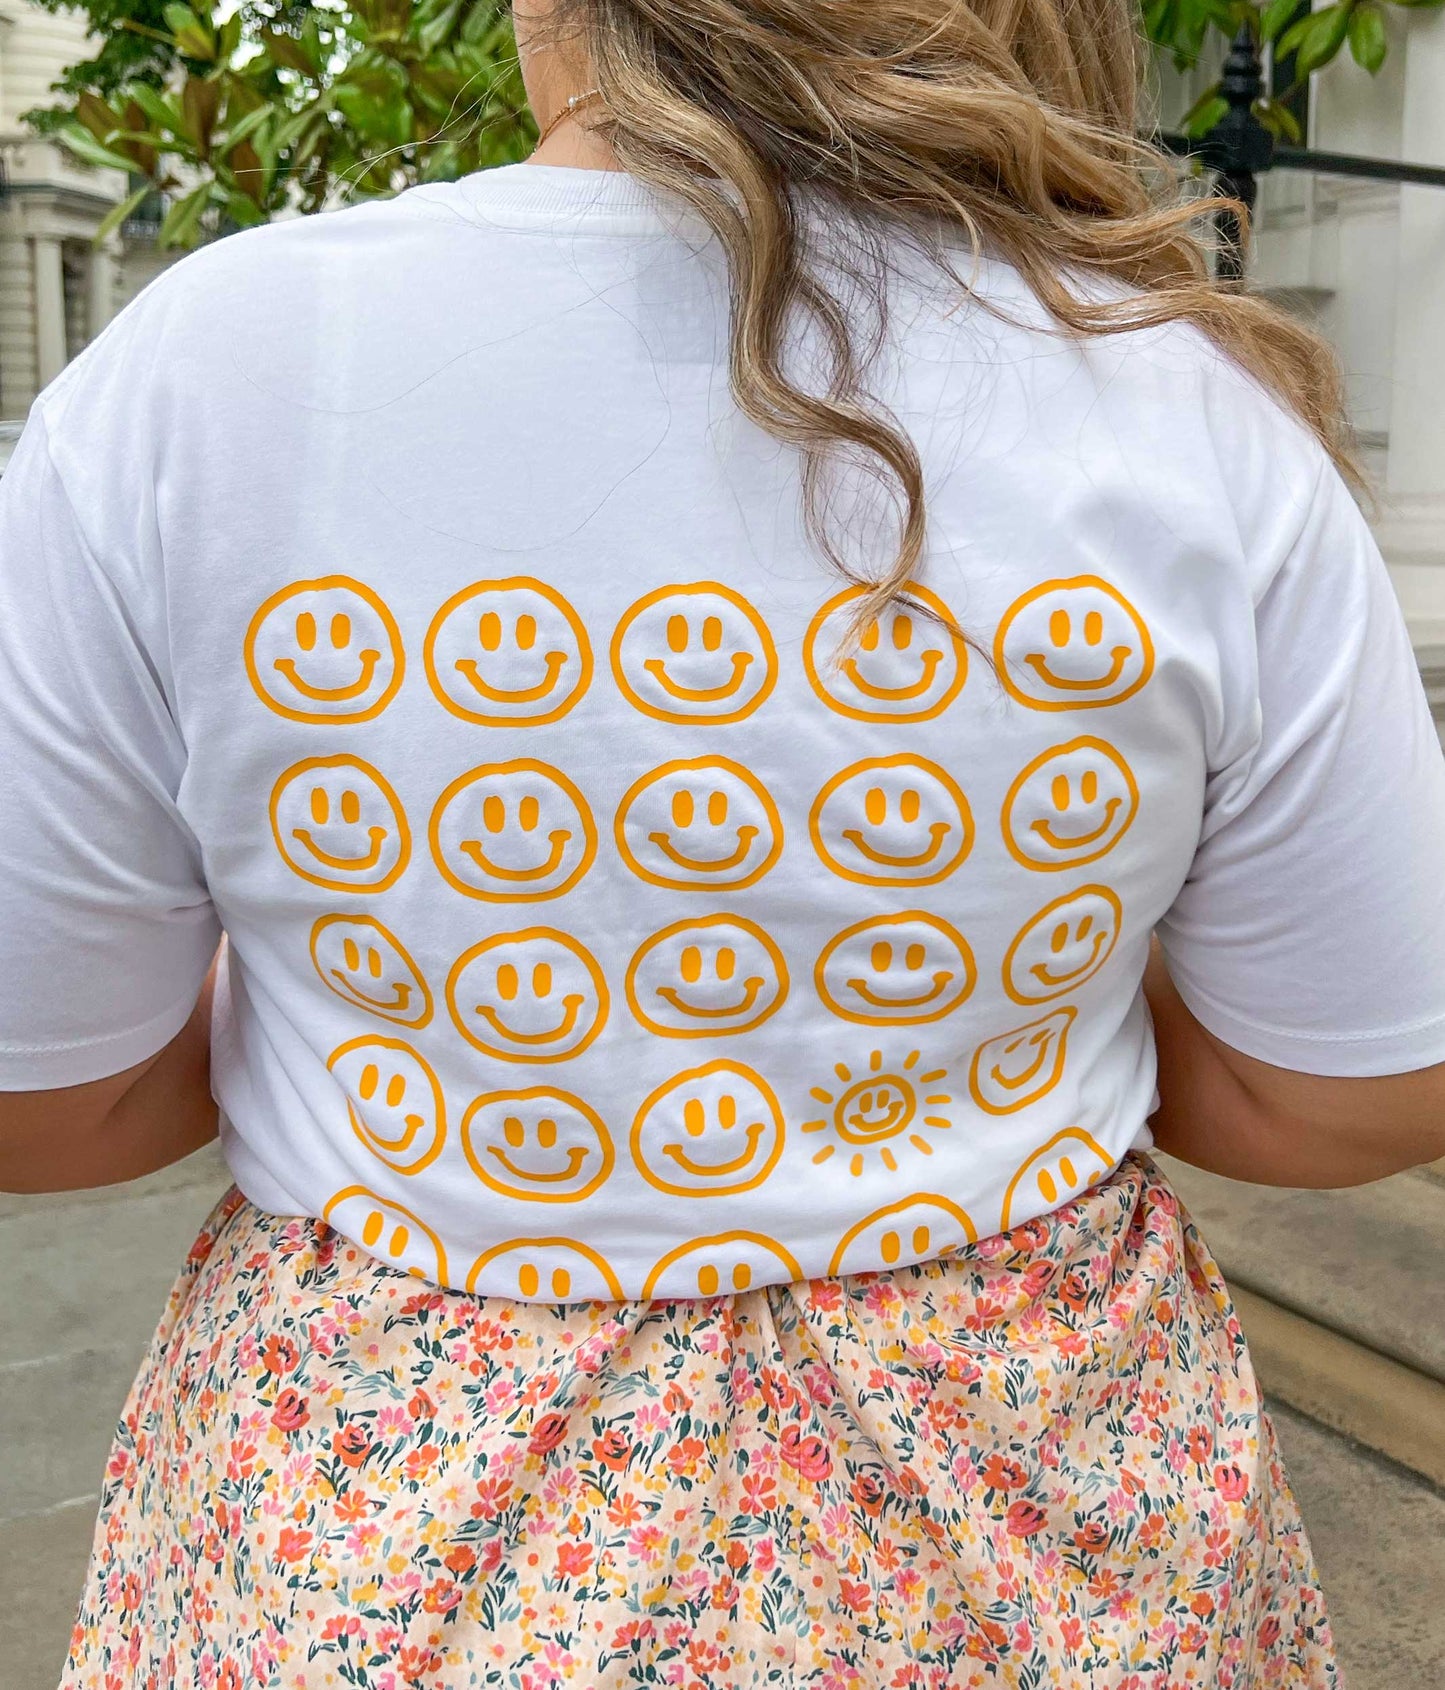 Happiest In The Sunshine T-Shirt